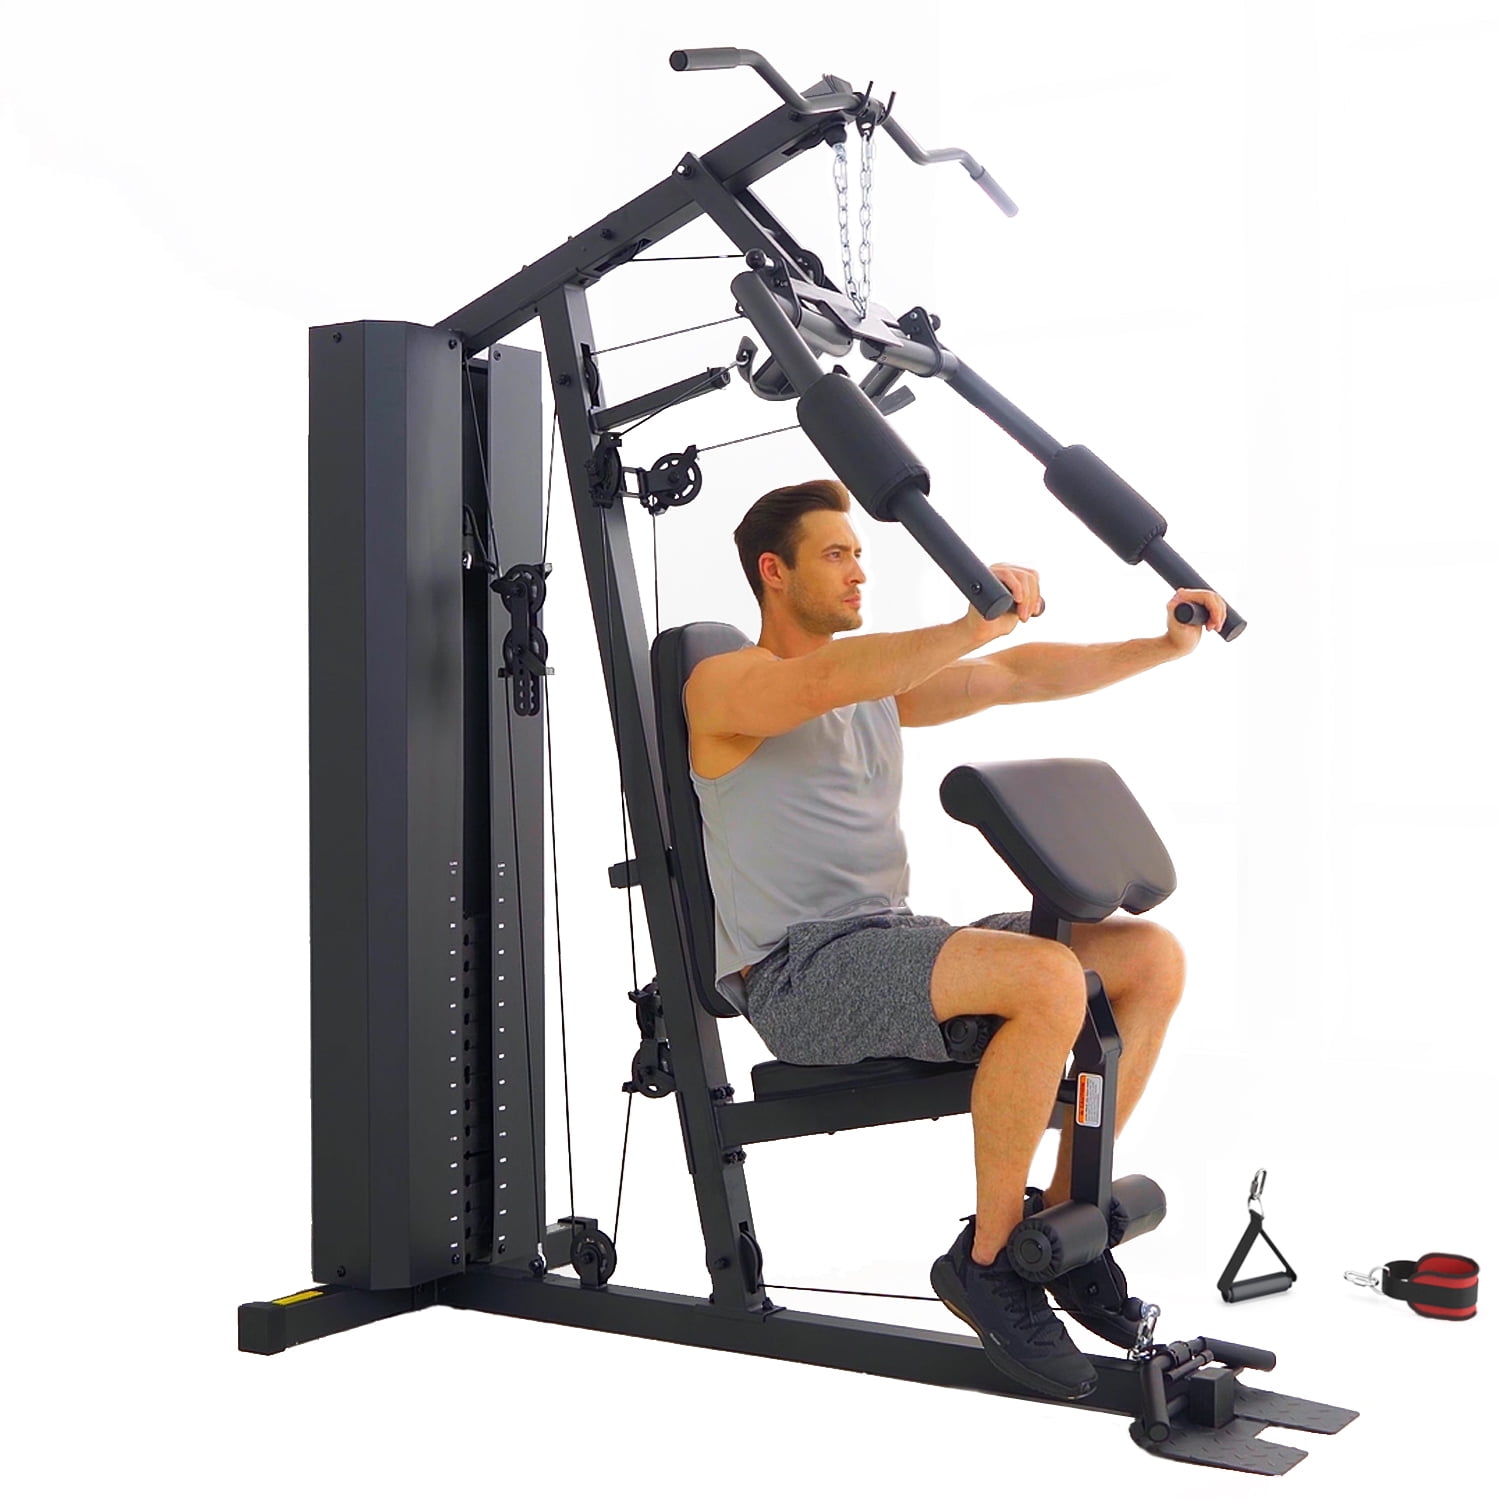 Home Workout Equipment - Home Gym Equipment- Free Shipping